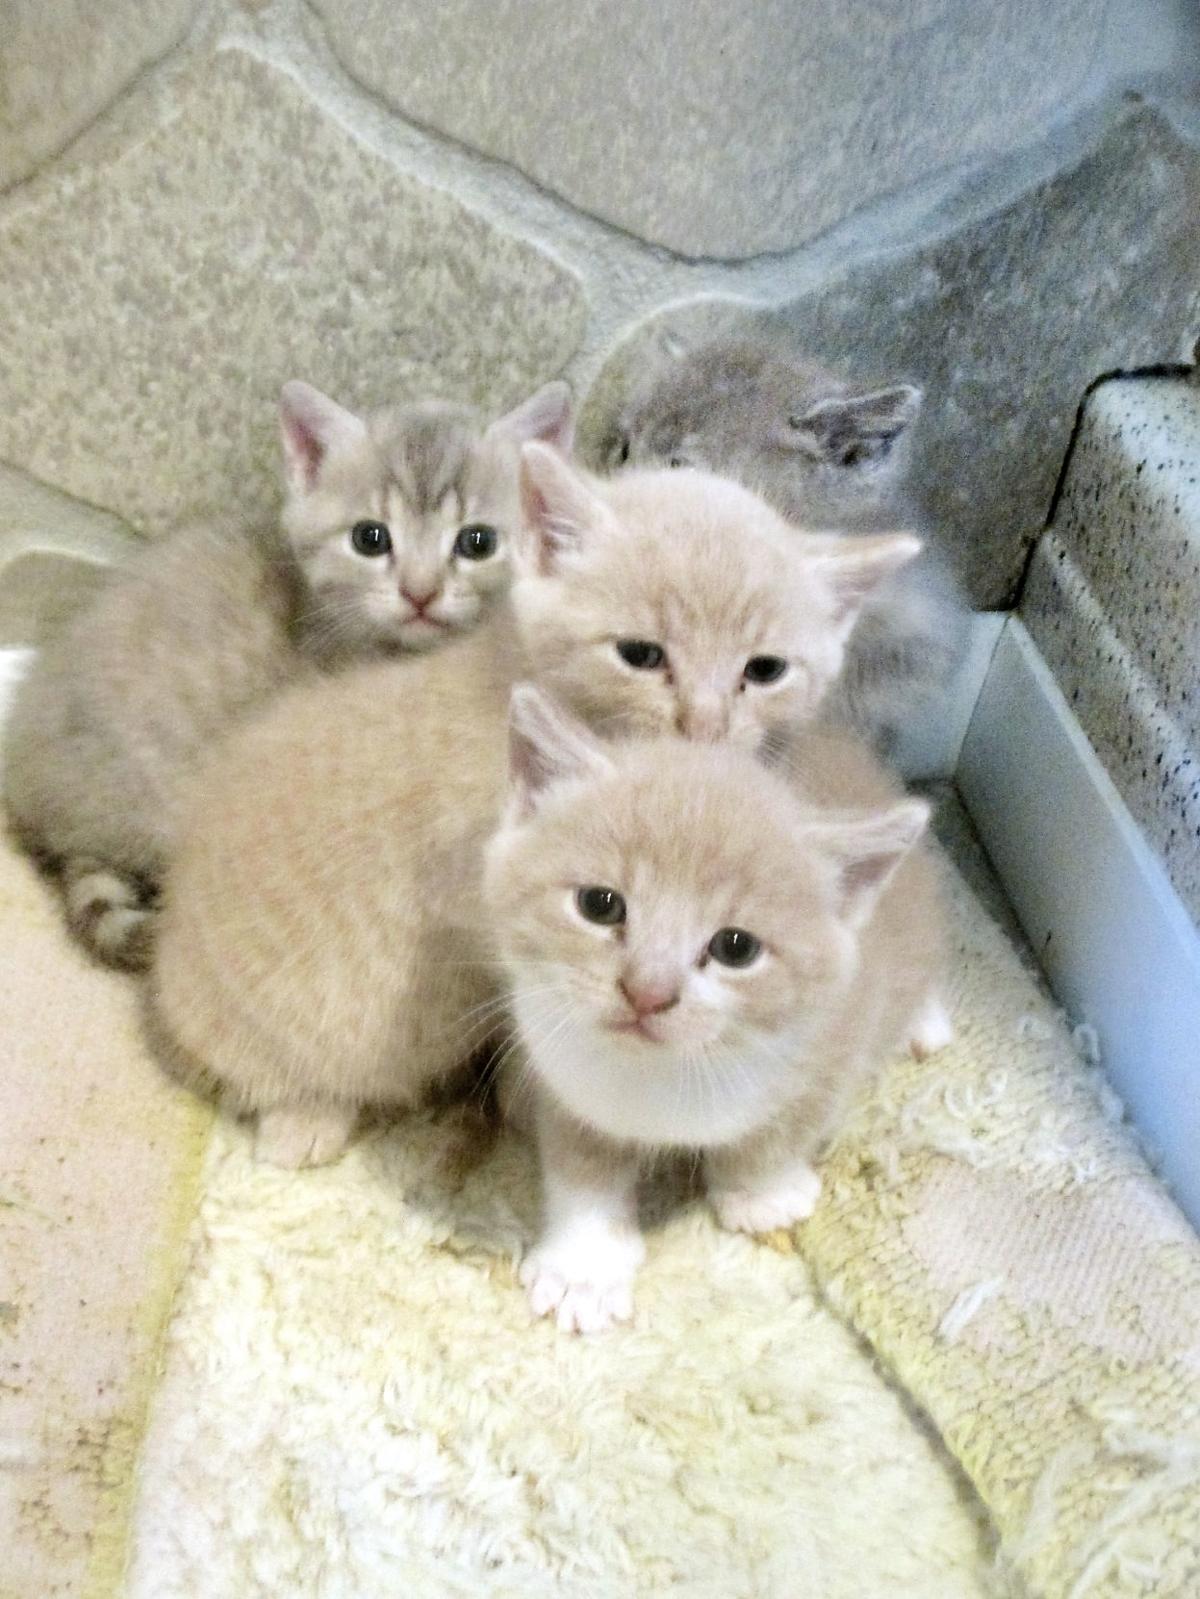 Baby Kittens For Sale At Petco petfinder